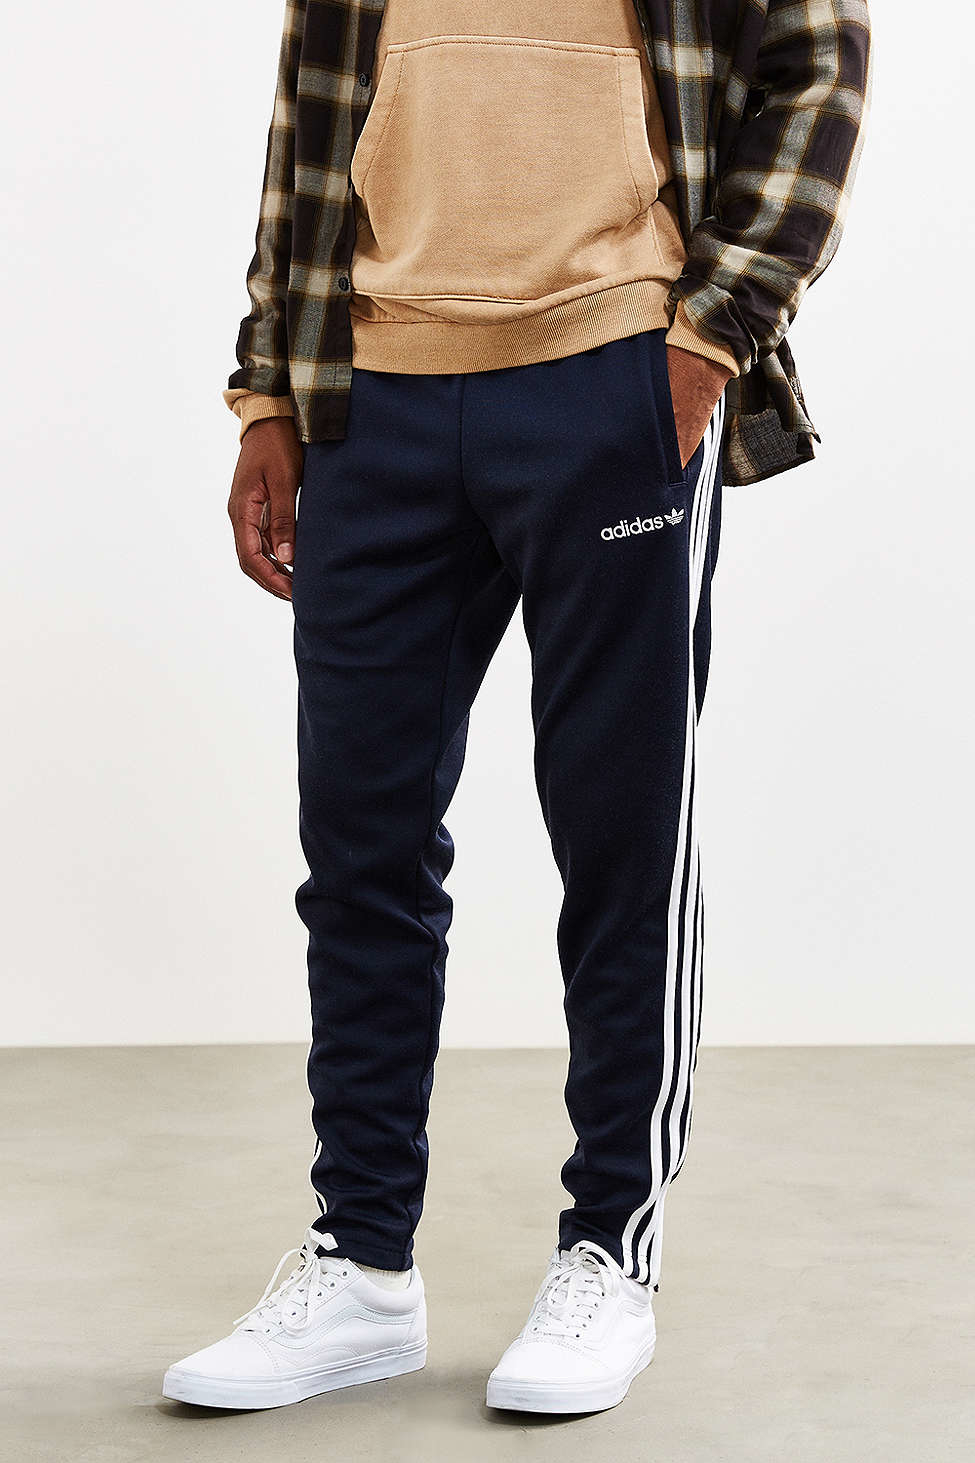 adidas Originals + Uo Fitted Track Pant in Blue for Men - Lyst